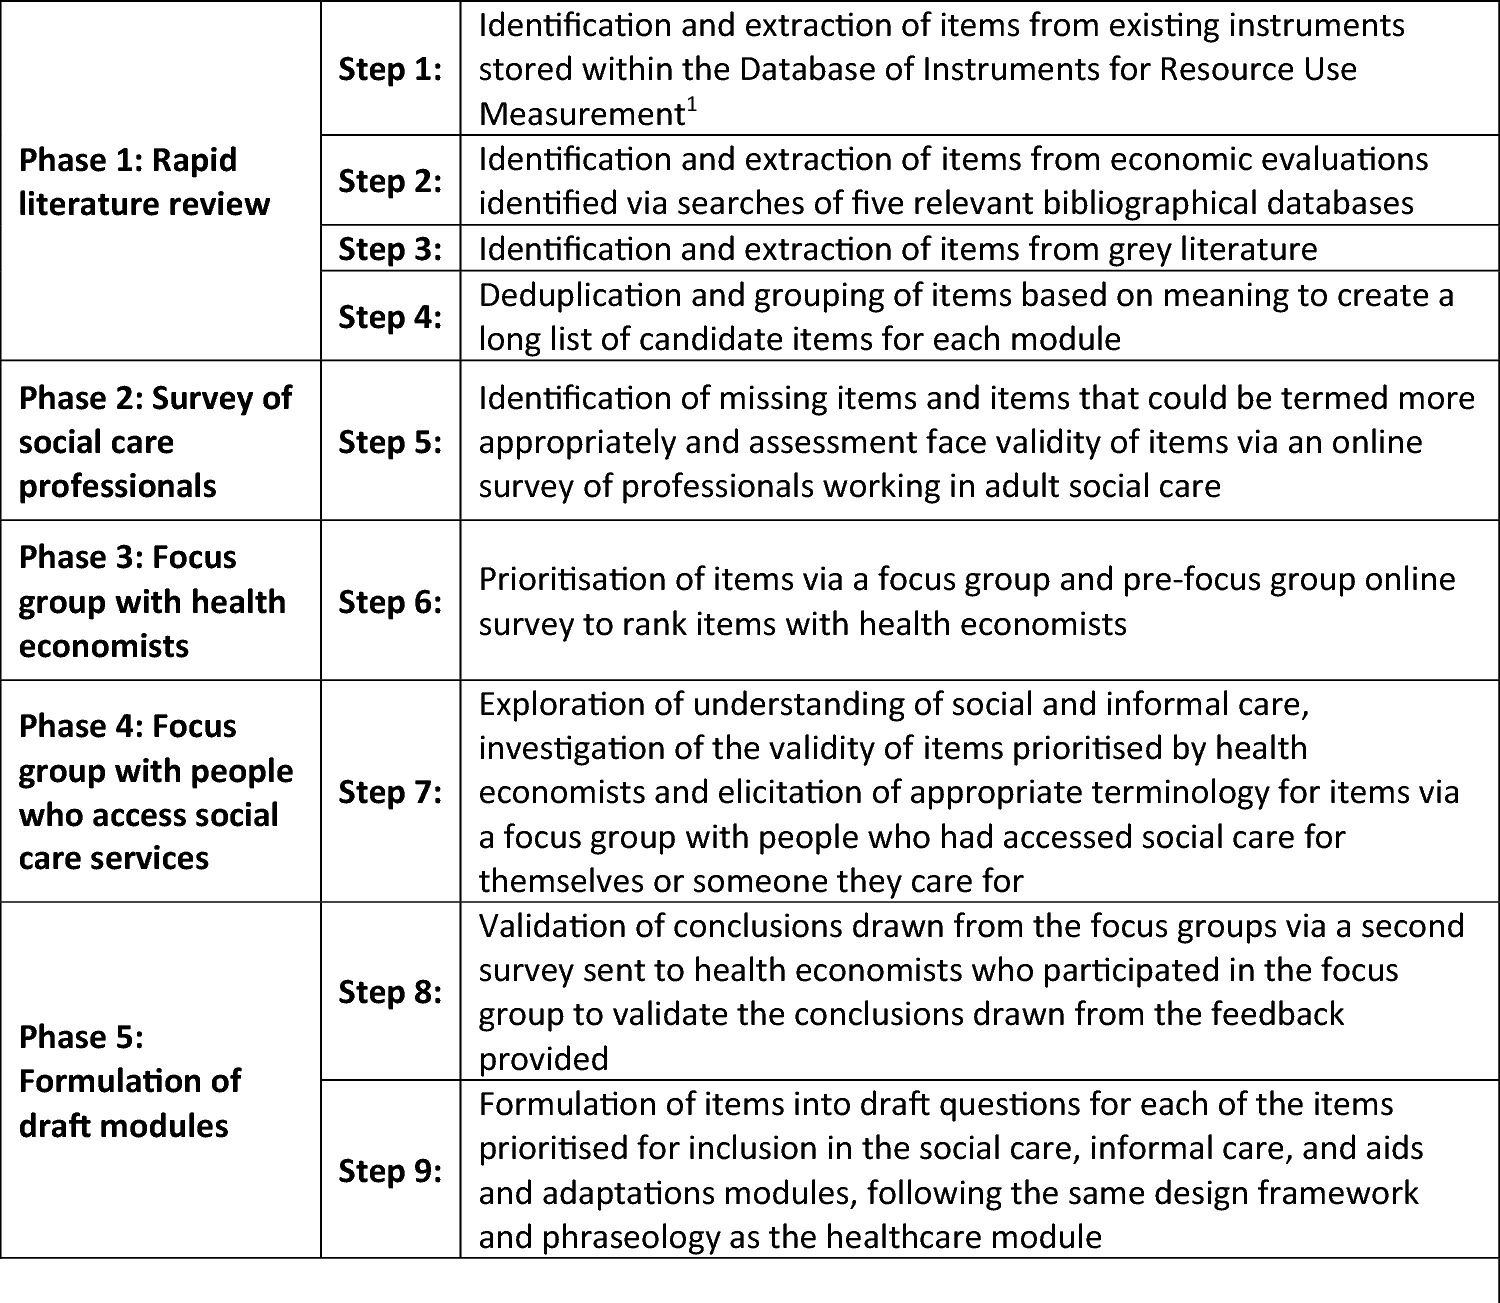 Identification and prioritisation of items for a draft participant-reported questionnaire to measure use of social care, informal care, aids and adaptations